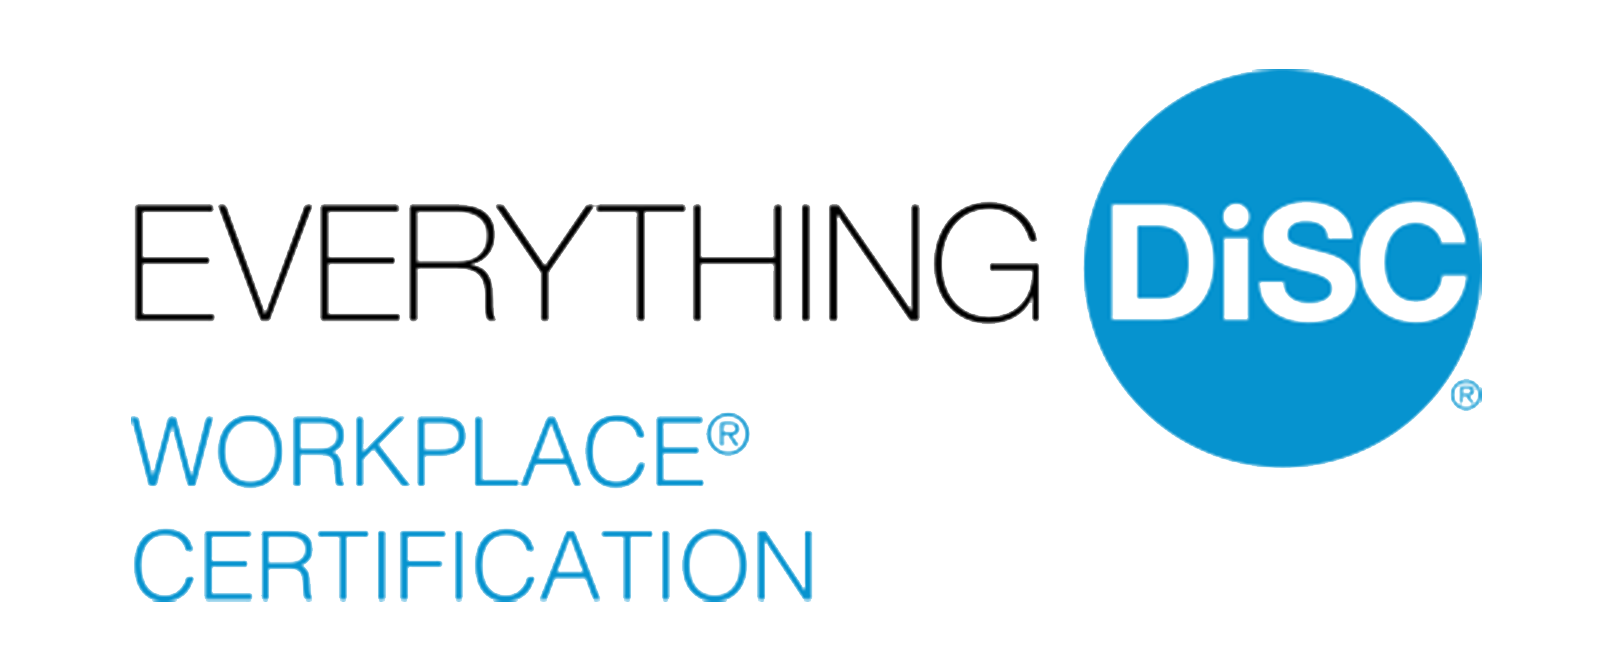 Licensed to Deliver Everything DiSC Certification Courses On-Site